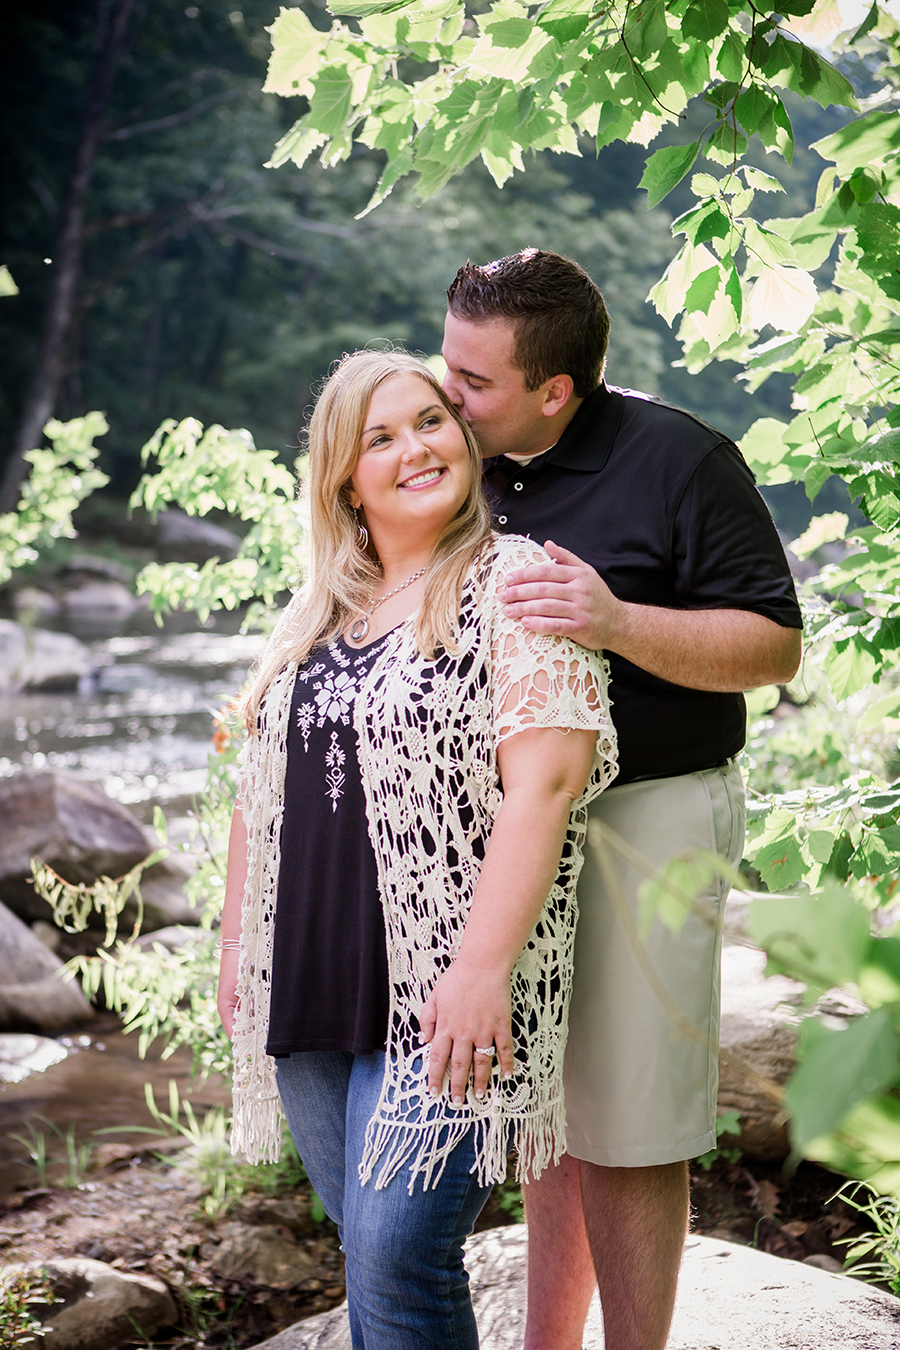 Her kisses her cheek from behind engagement photo by Knoxville Wedding Photographer, Amanda May Photos.